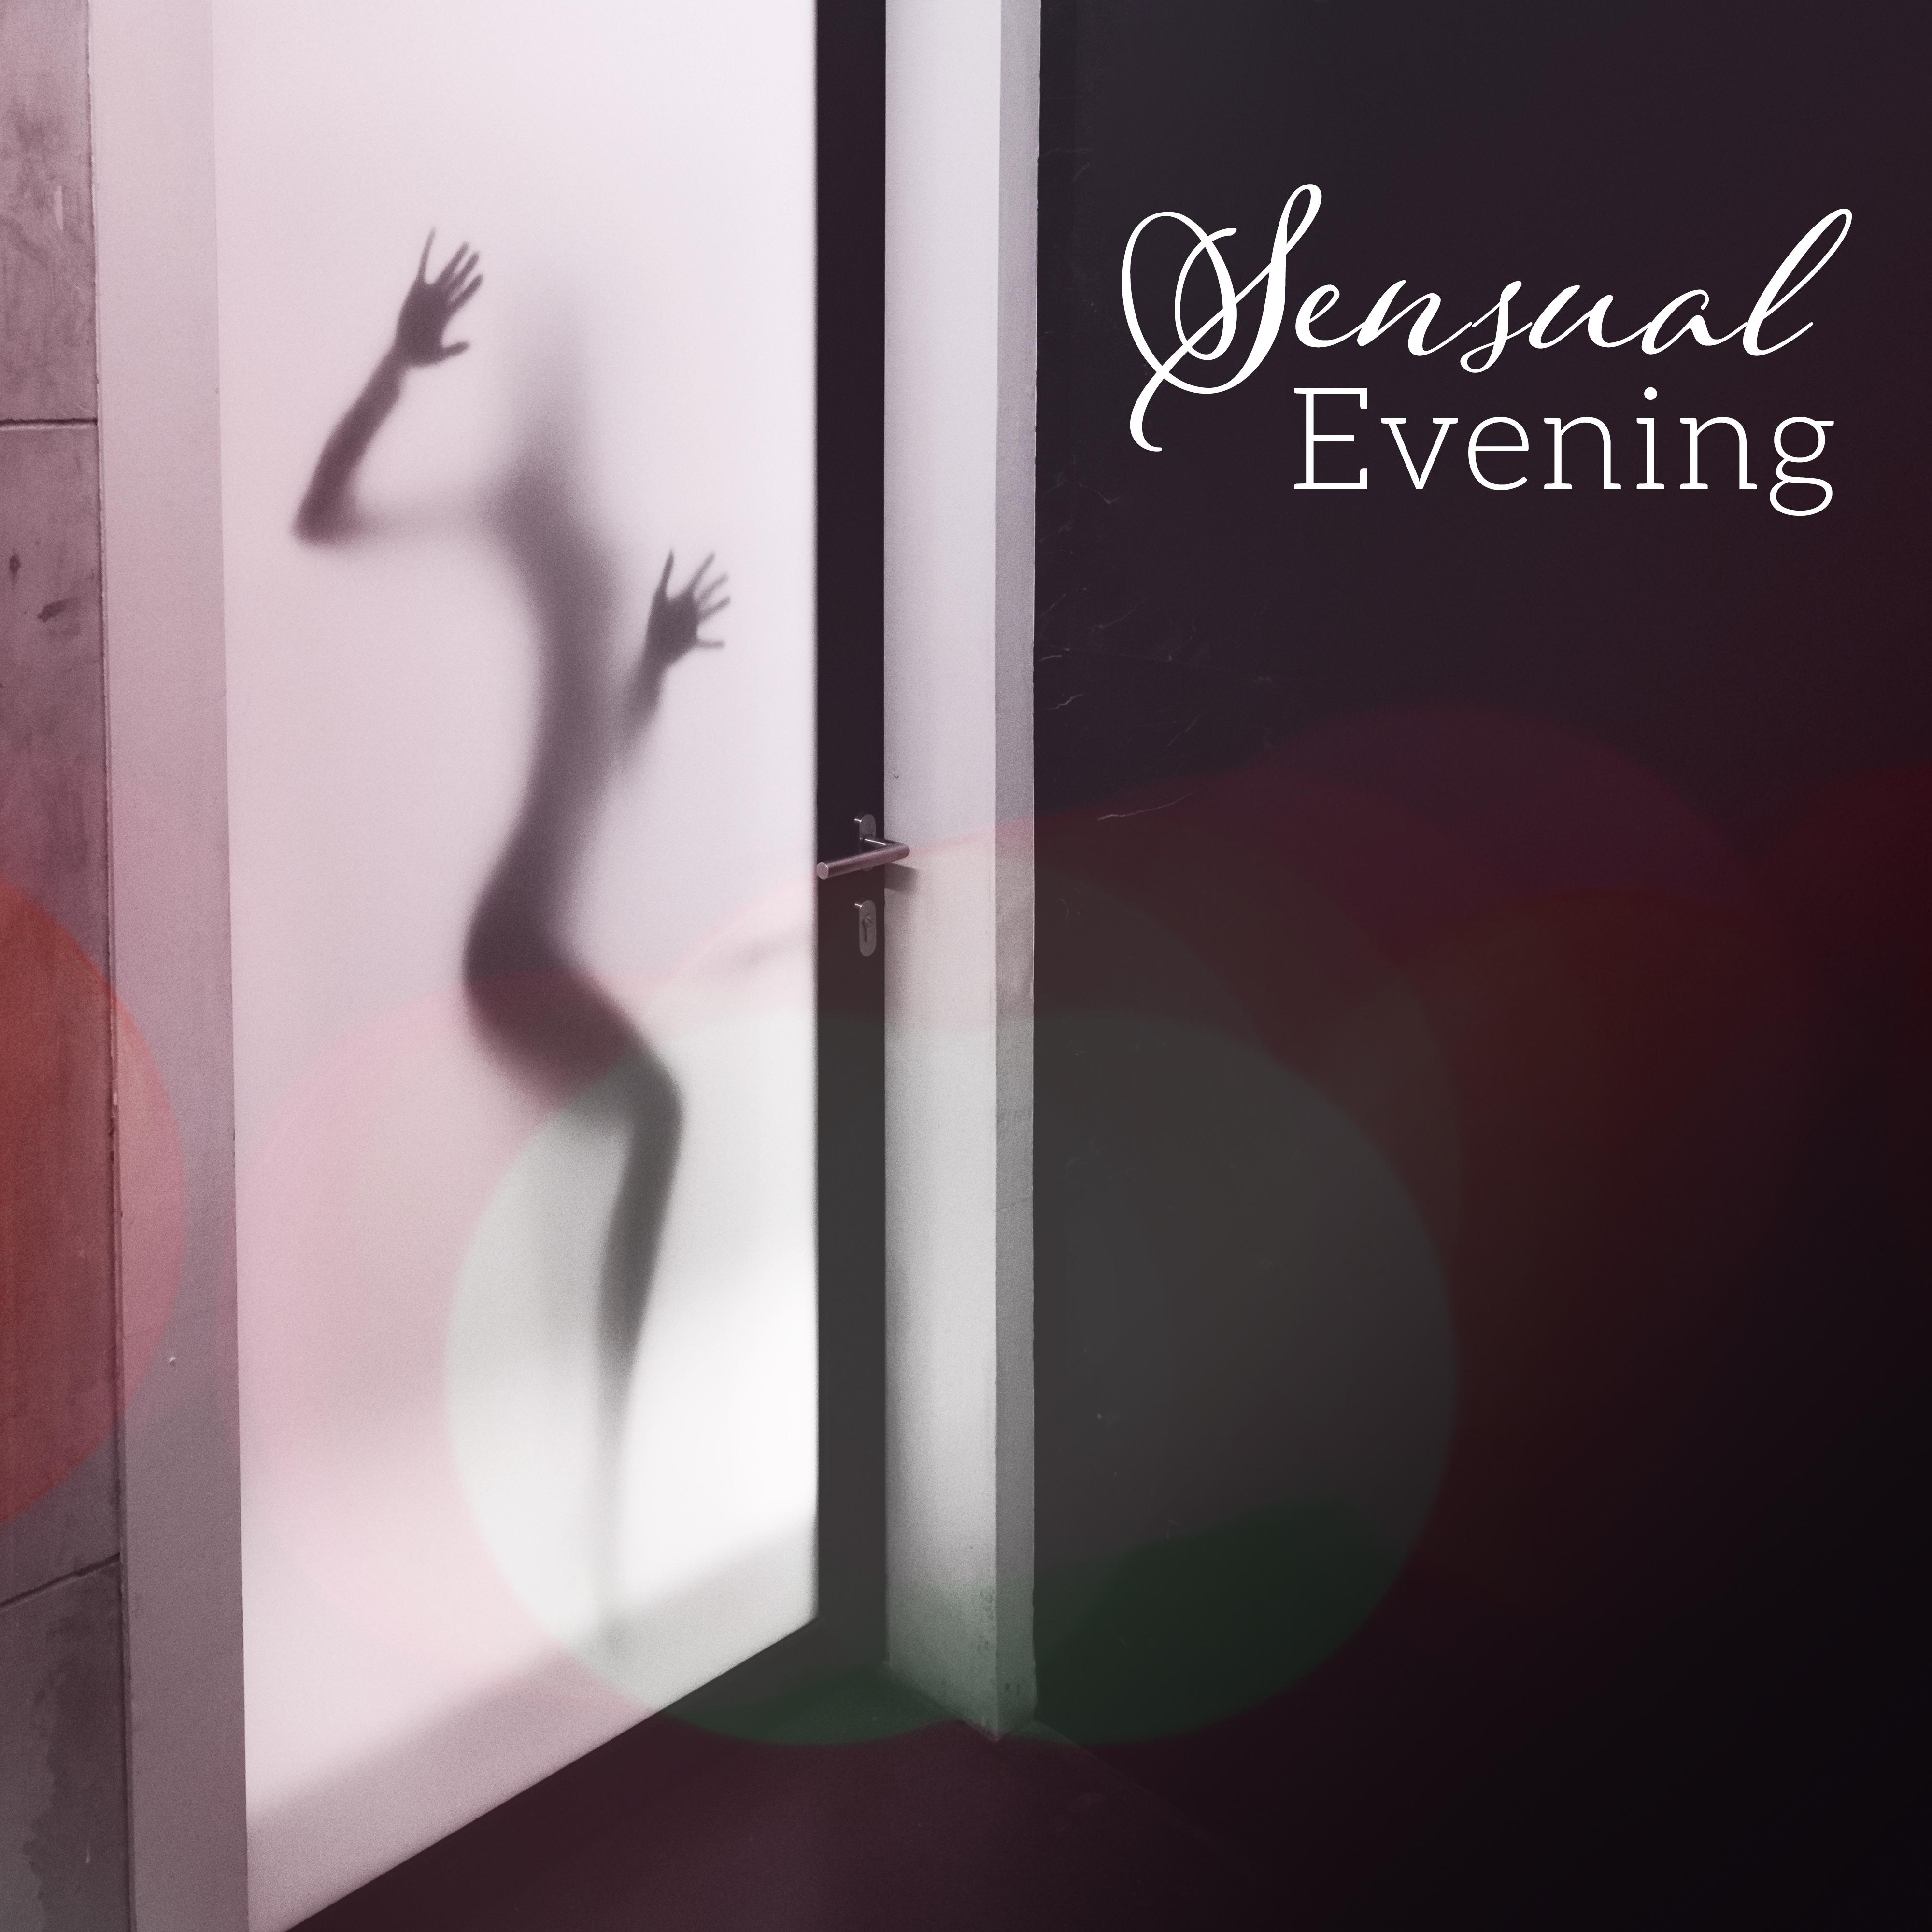 Sensual Evening – Jazz Relaxation, Dinner by Candlelight, Erotic Lounge, Tantric ***, Night Sounds